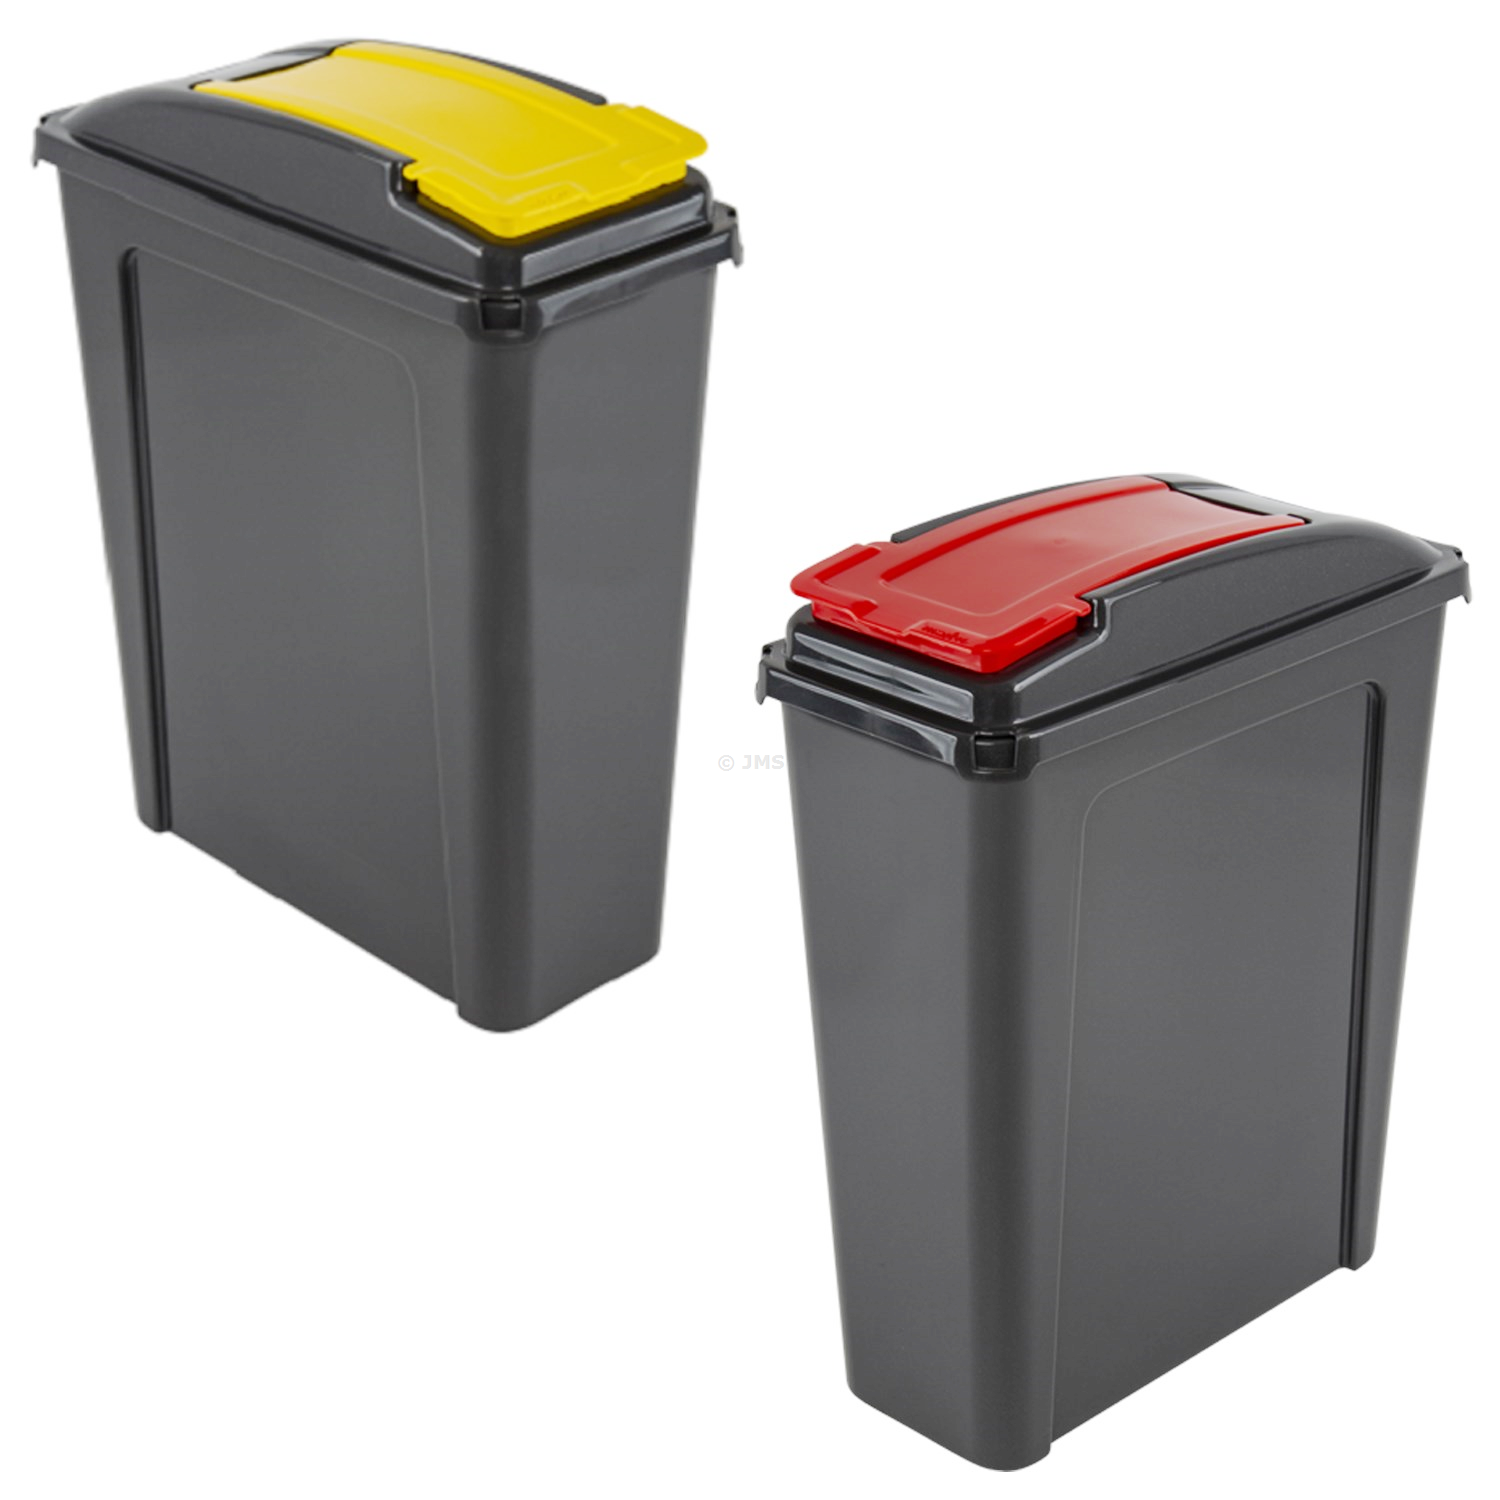 Plastic Recycle It 25L Slimline Bin & Lid RED + YELLOW Waste Recycling Dustbin Multi-purpose Storage Container Home Kitchen Garden